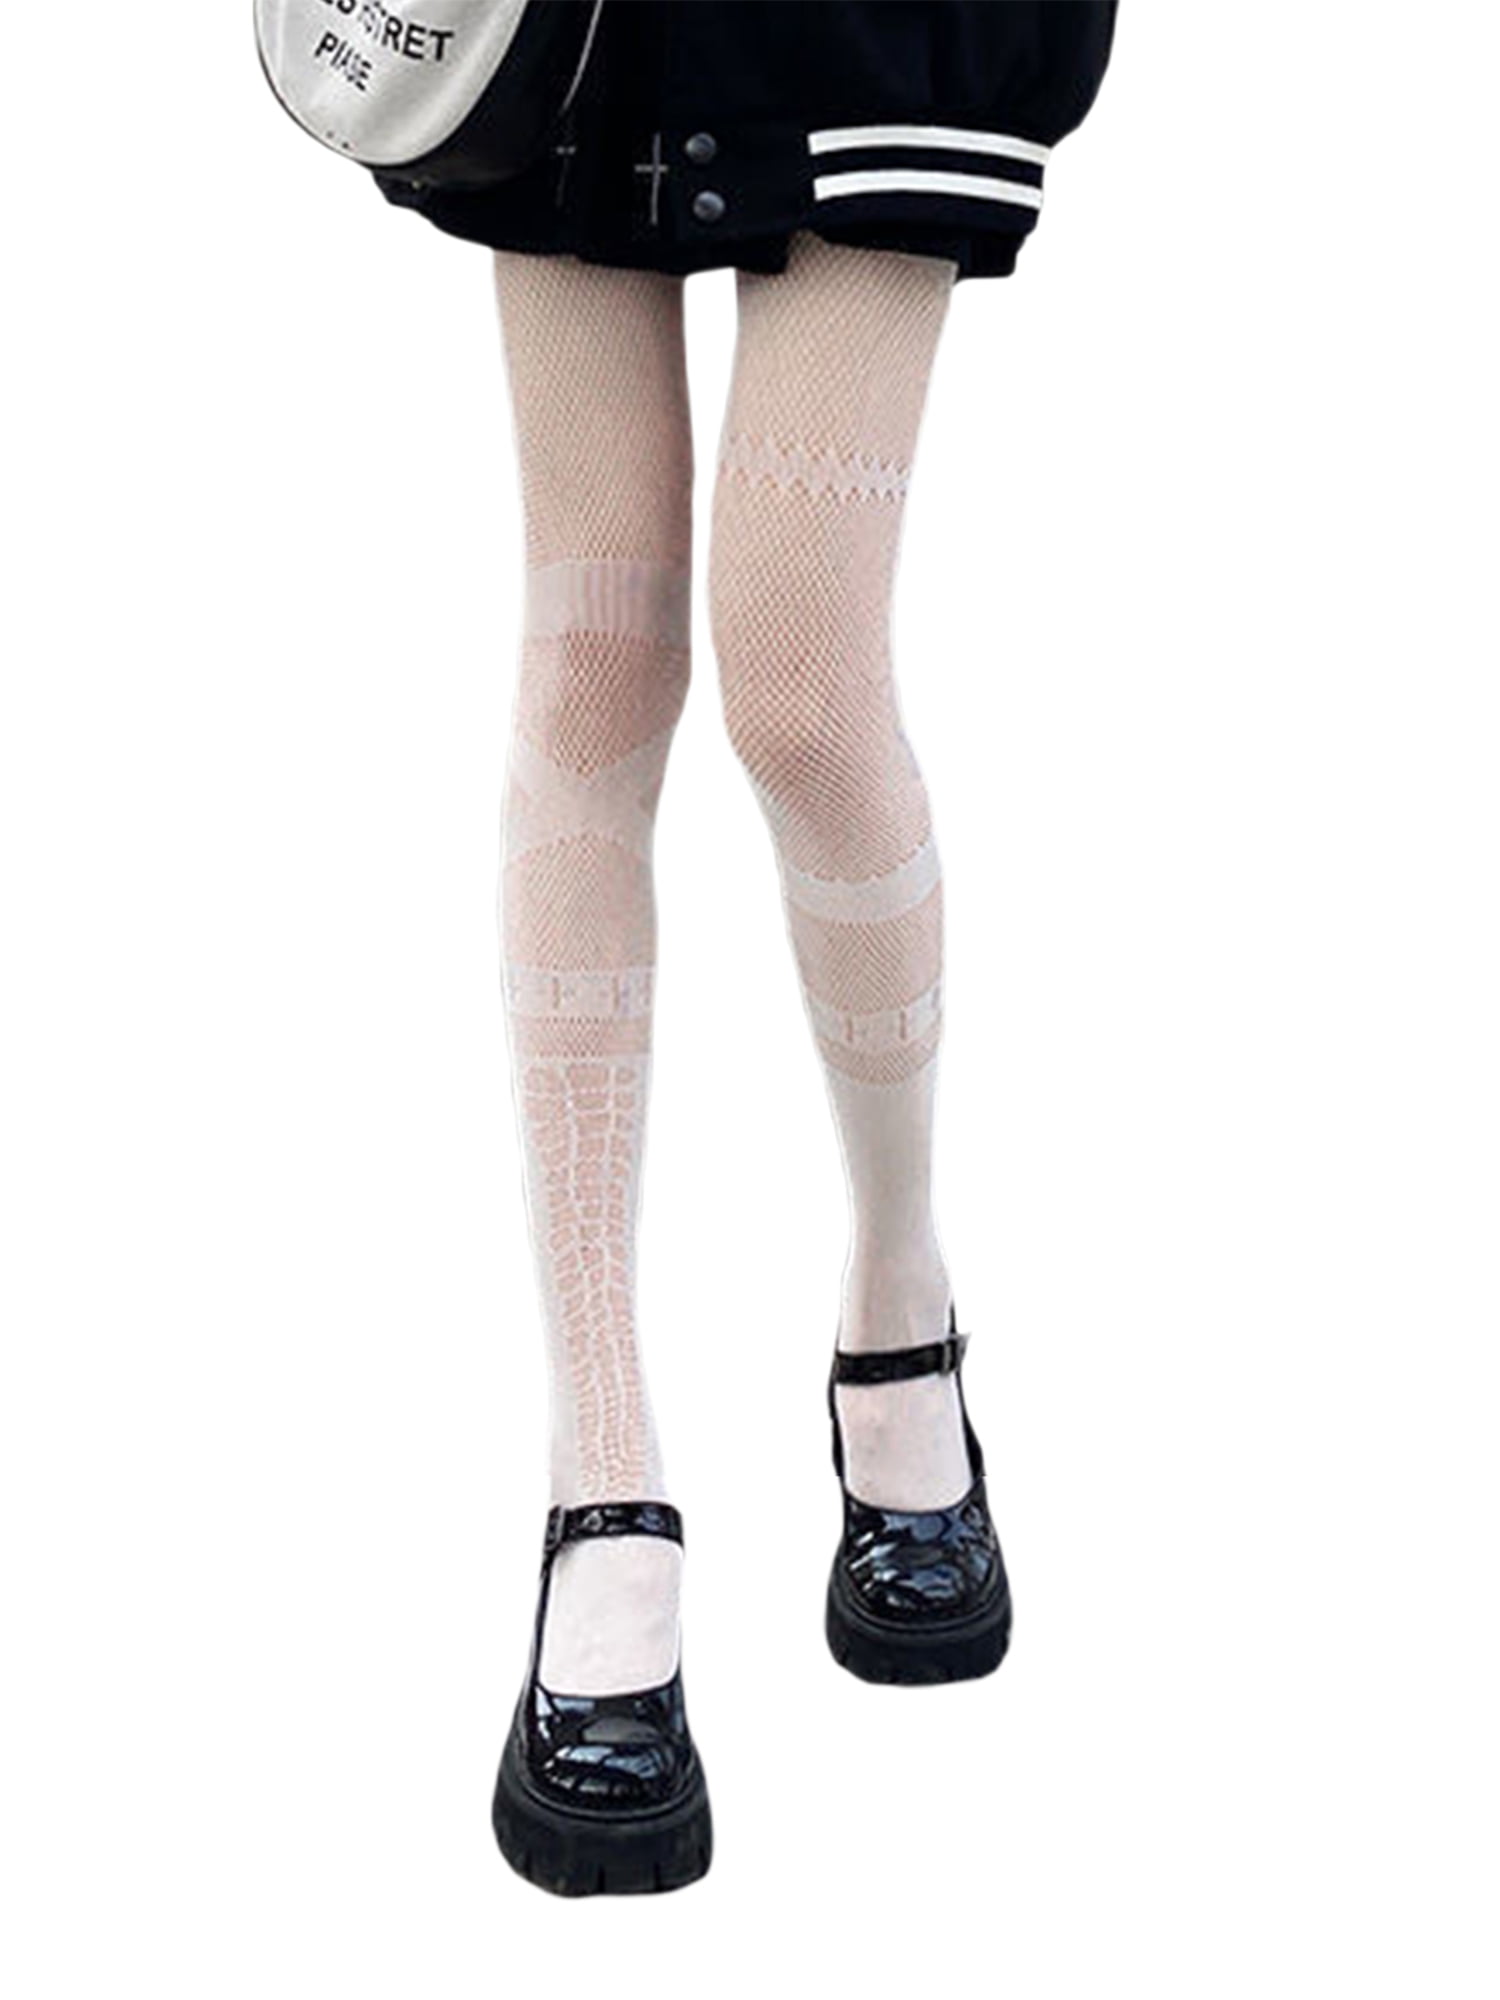 putting on sexy stockings fishnets and knee high socks like a good girl